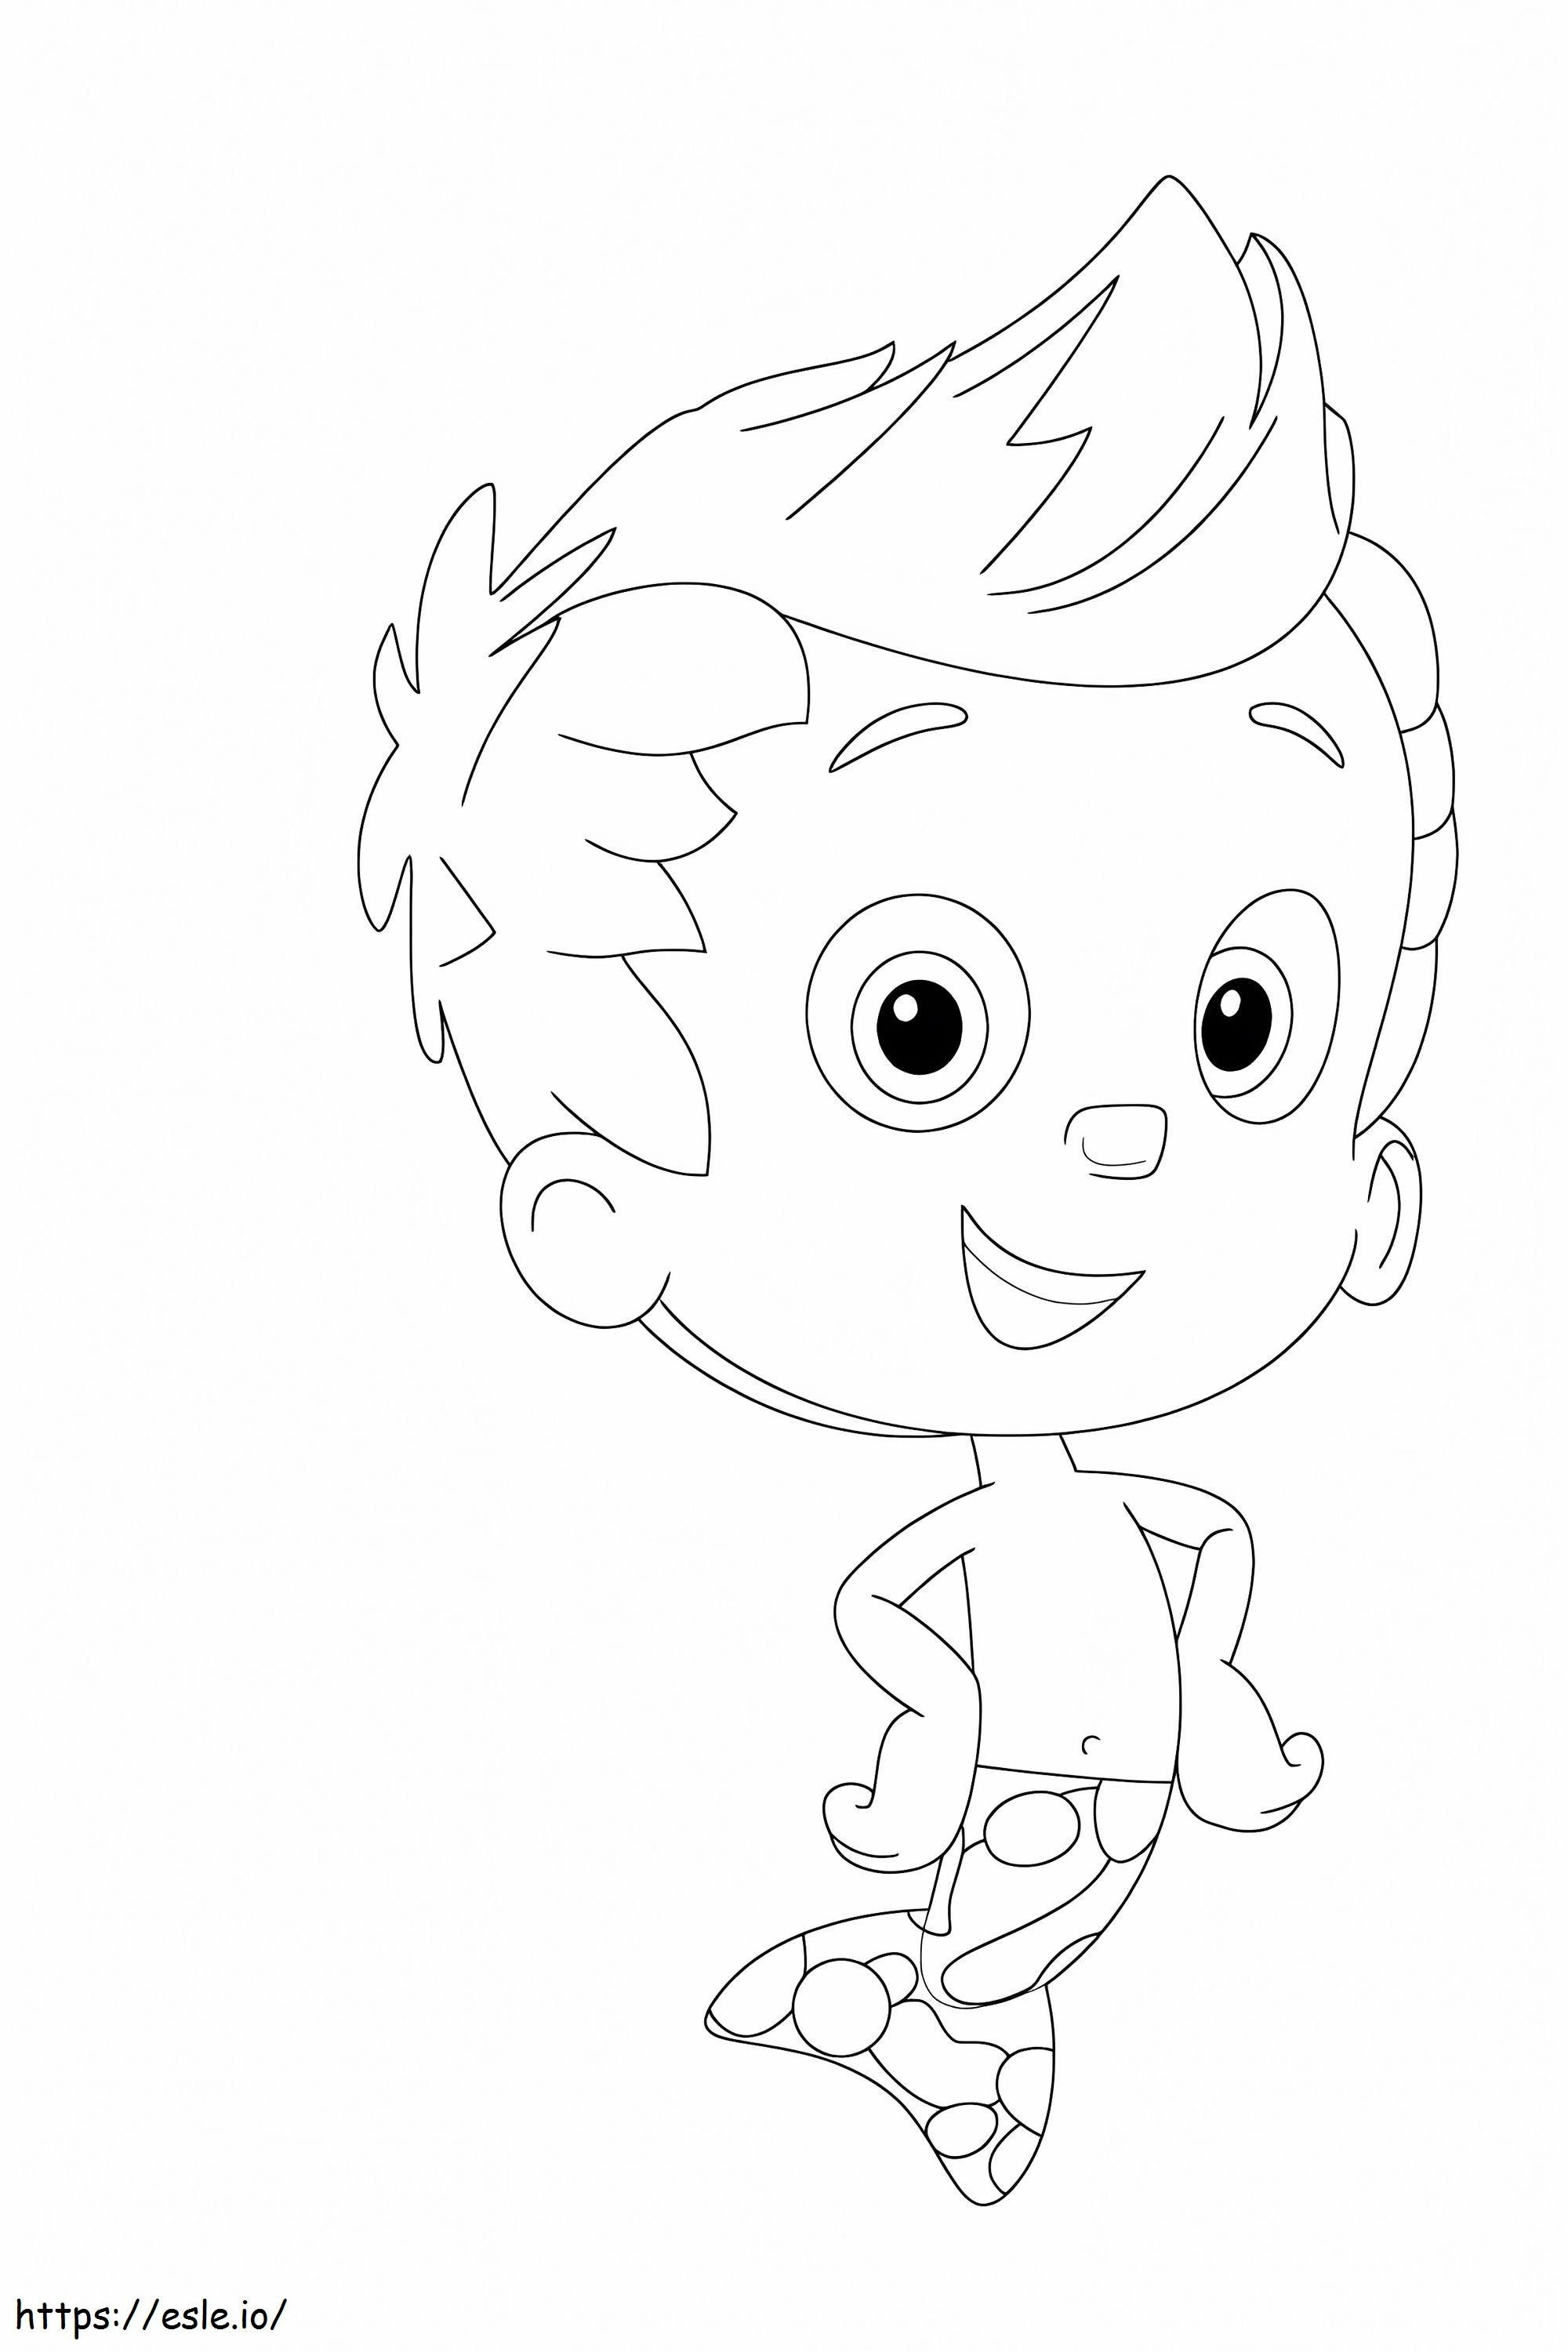 1562633661_Happy Gil A4 coloring page